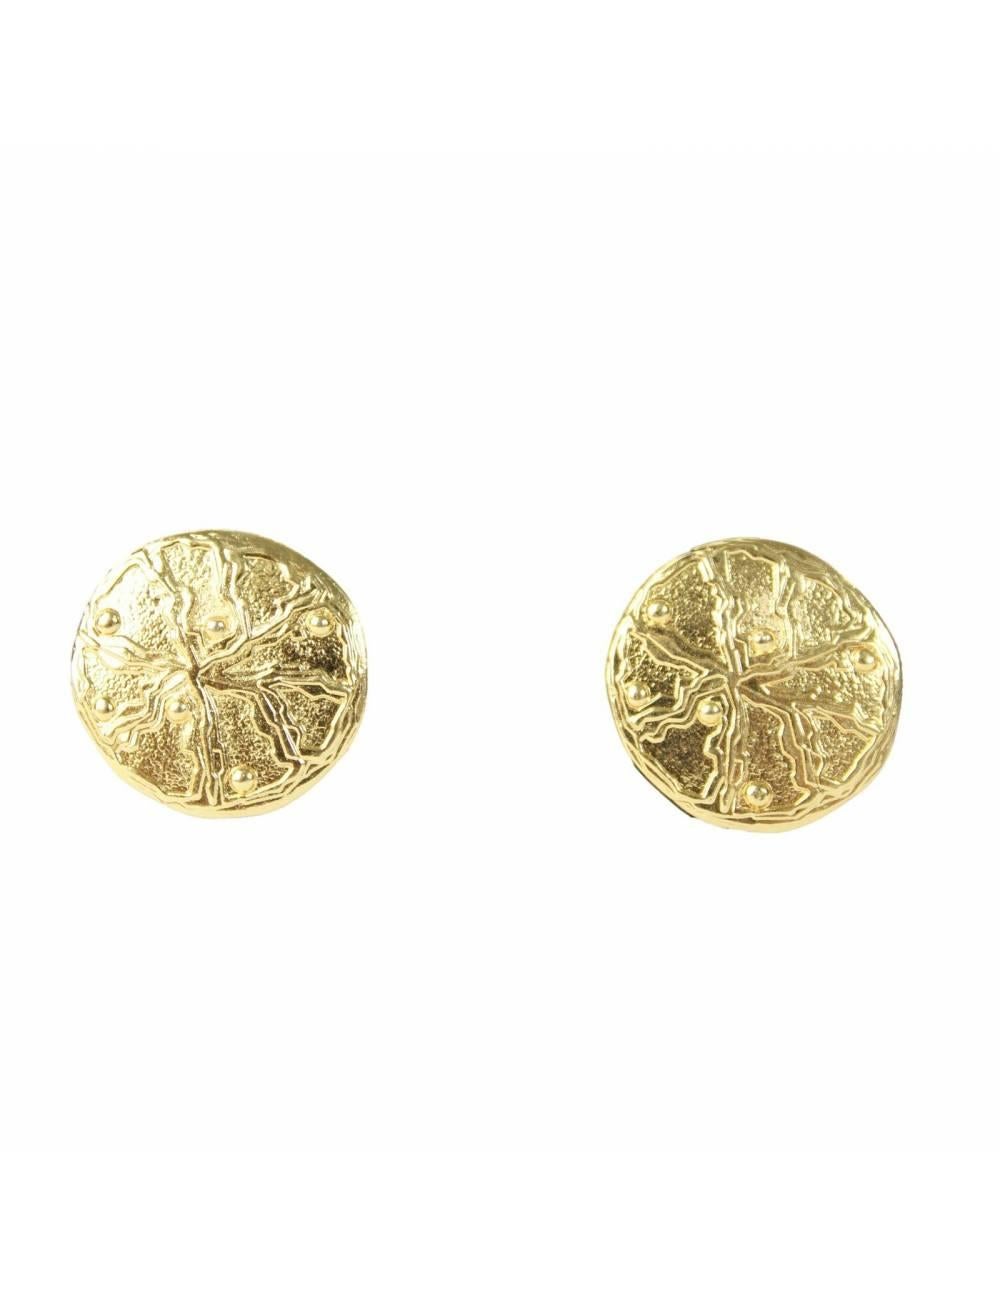 Vintage earrings by Loris Azzaro brand, gold color, costume jewelry.

The earrings have a round shape, the closure is a clip.

Diameter: 2 cm